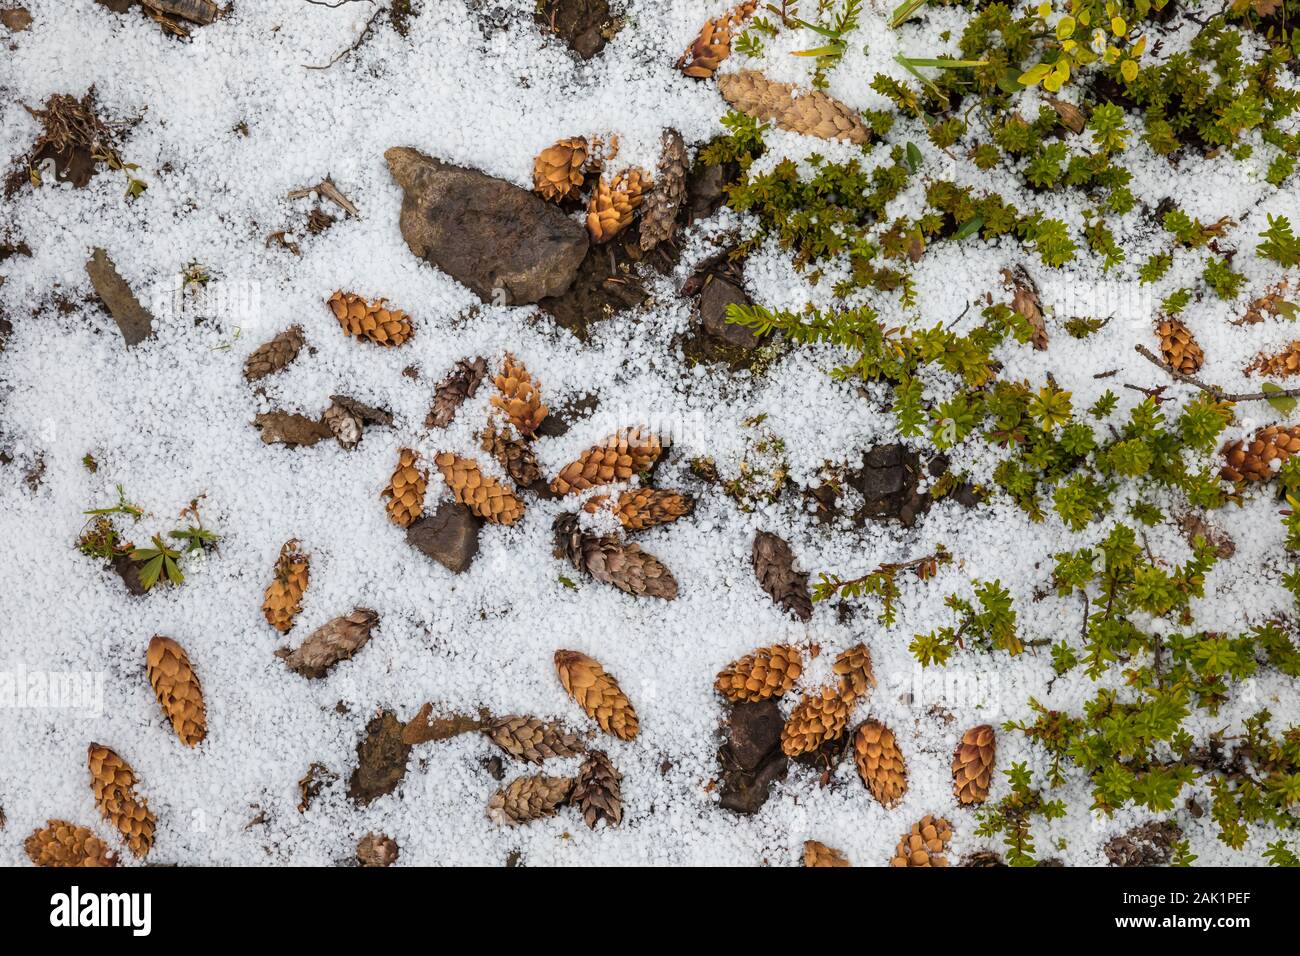 Engelmann Spruce, Picea engelmannii, dropped by a Red Squirrel, Tamiasciurus hudsonicus, on a snowy September day in Yoho National Park, British Colum Stock Photo